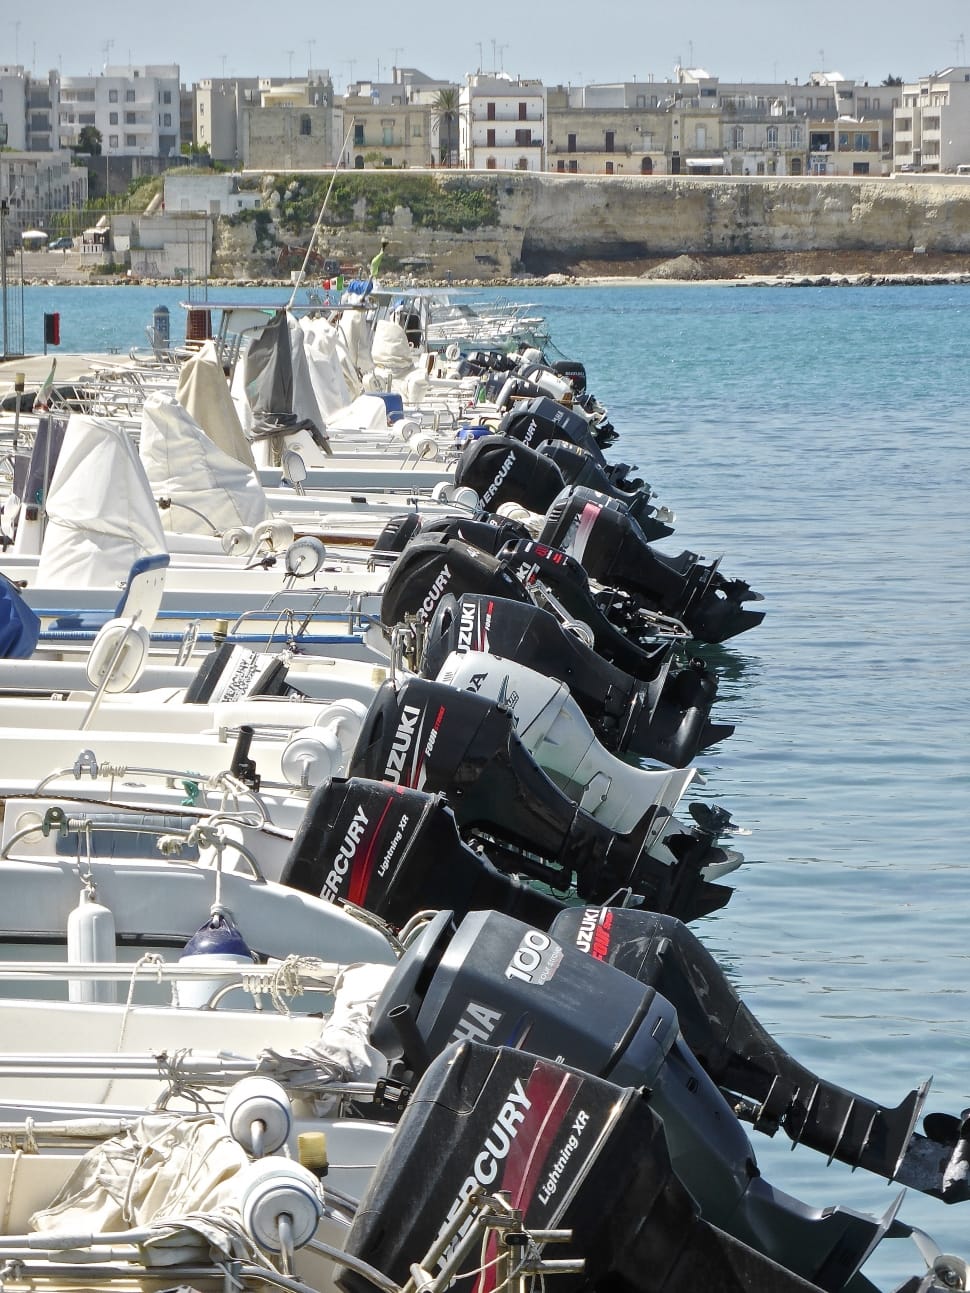 black outboard motors on boat near body of waters during daytime preview